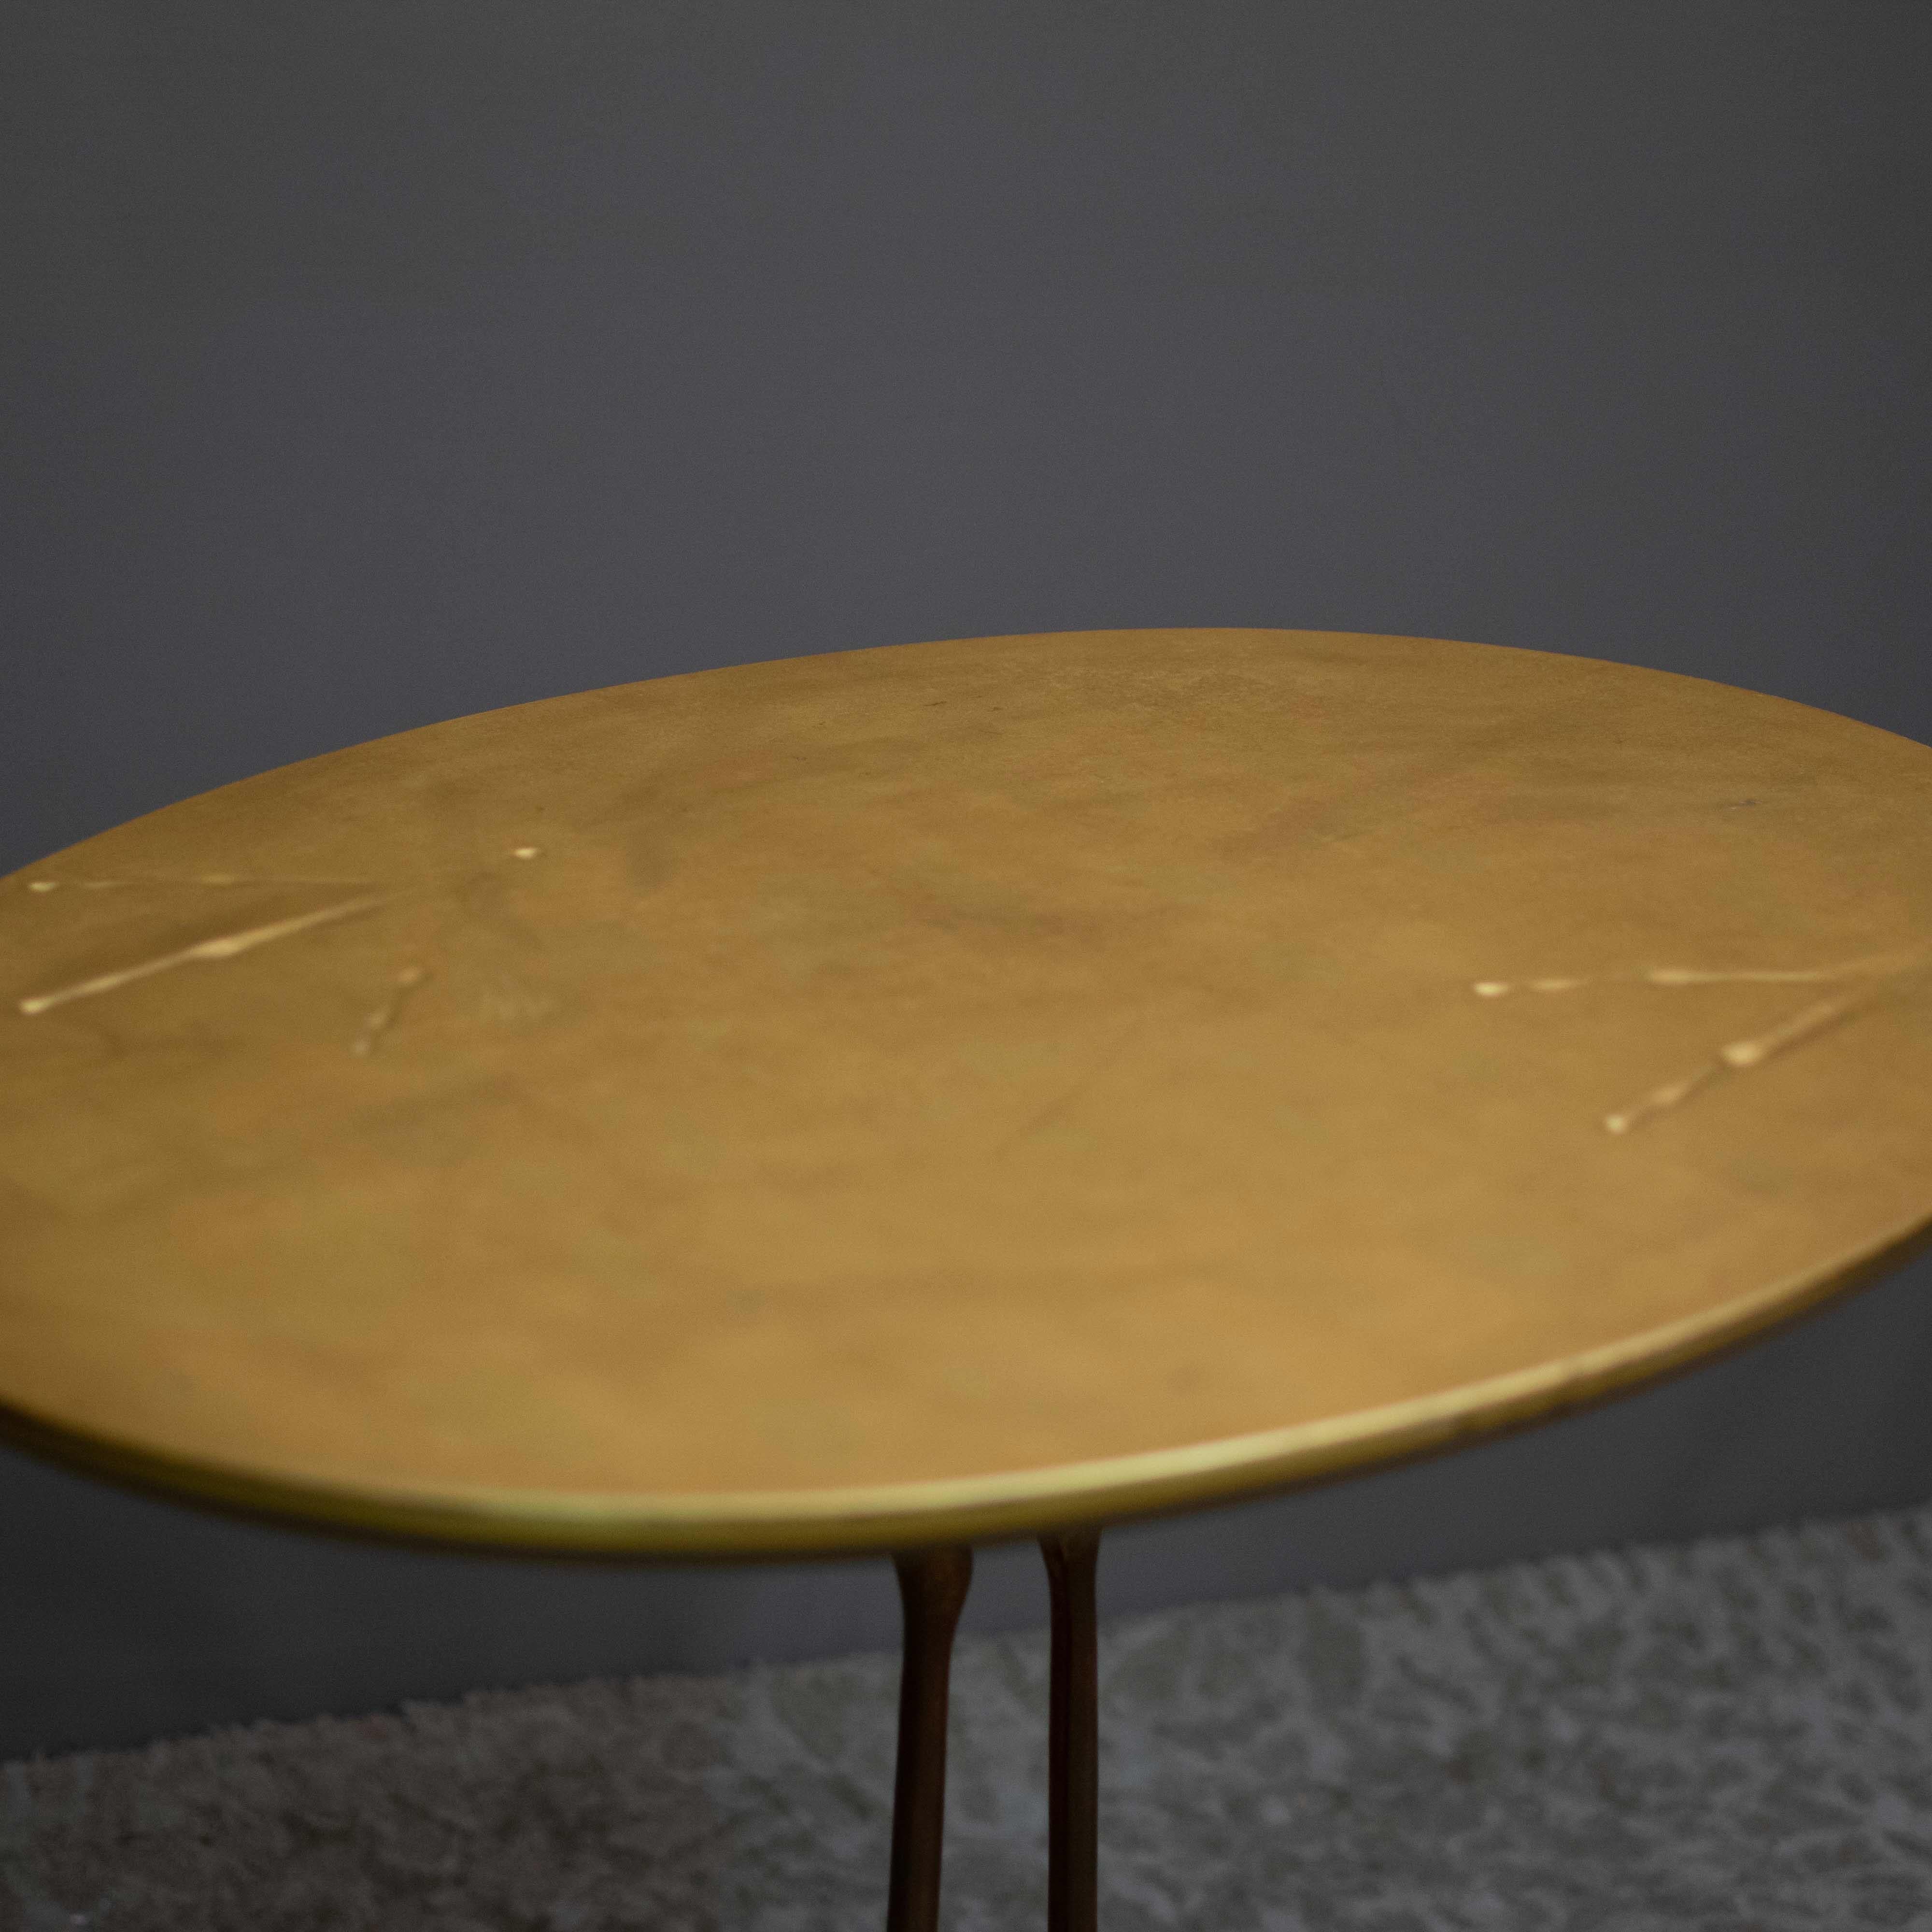 The Traccia coffee table is an icon of Italian design.
Its elliptical top is covered in pure gold leaf, and two fantastical birds are impressed on its surface.
The underside is painted with deep bronze-gold coloured paint.
Its legs in polished